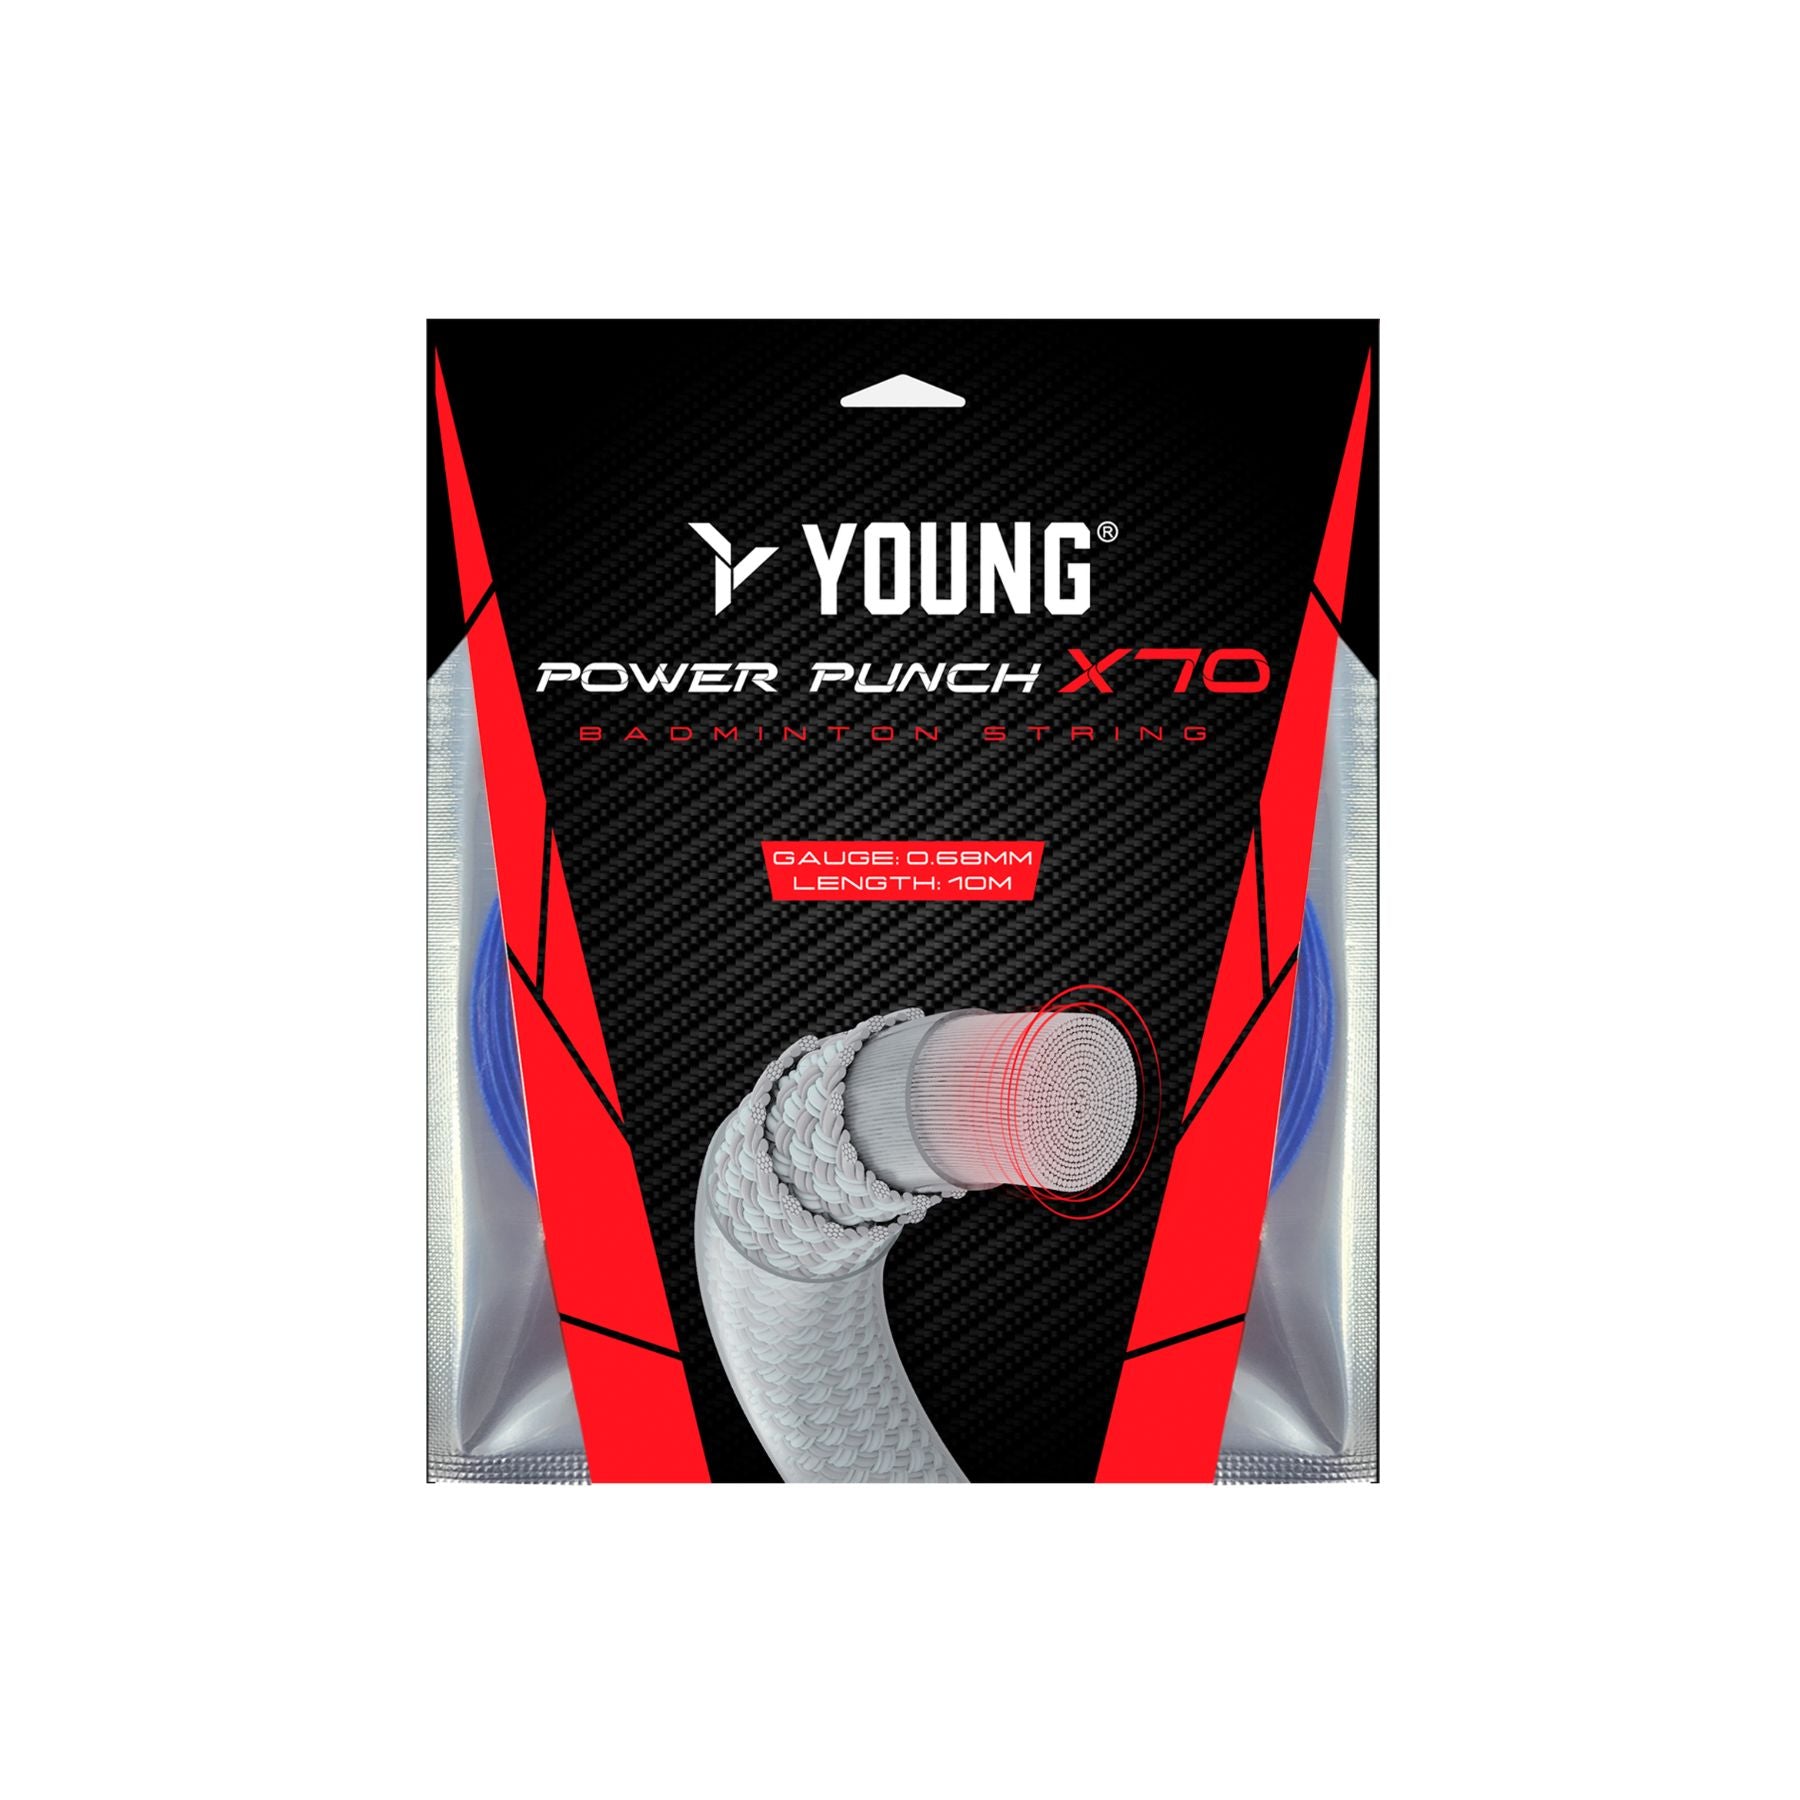 Young Power Punch X70 Badminton String